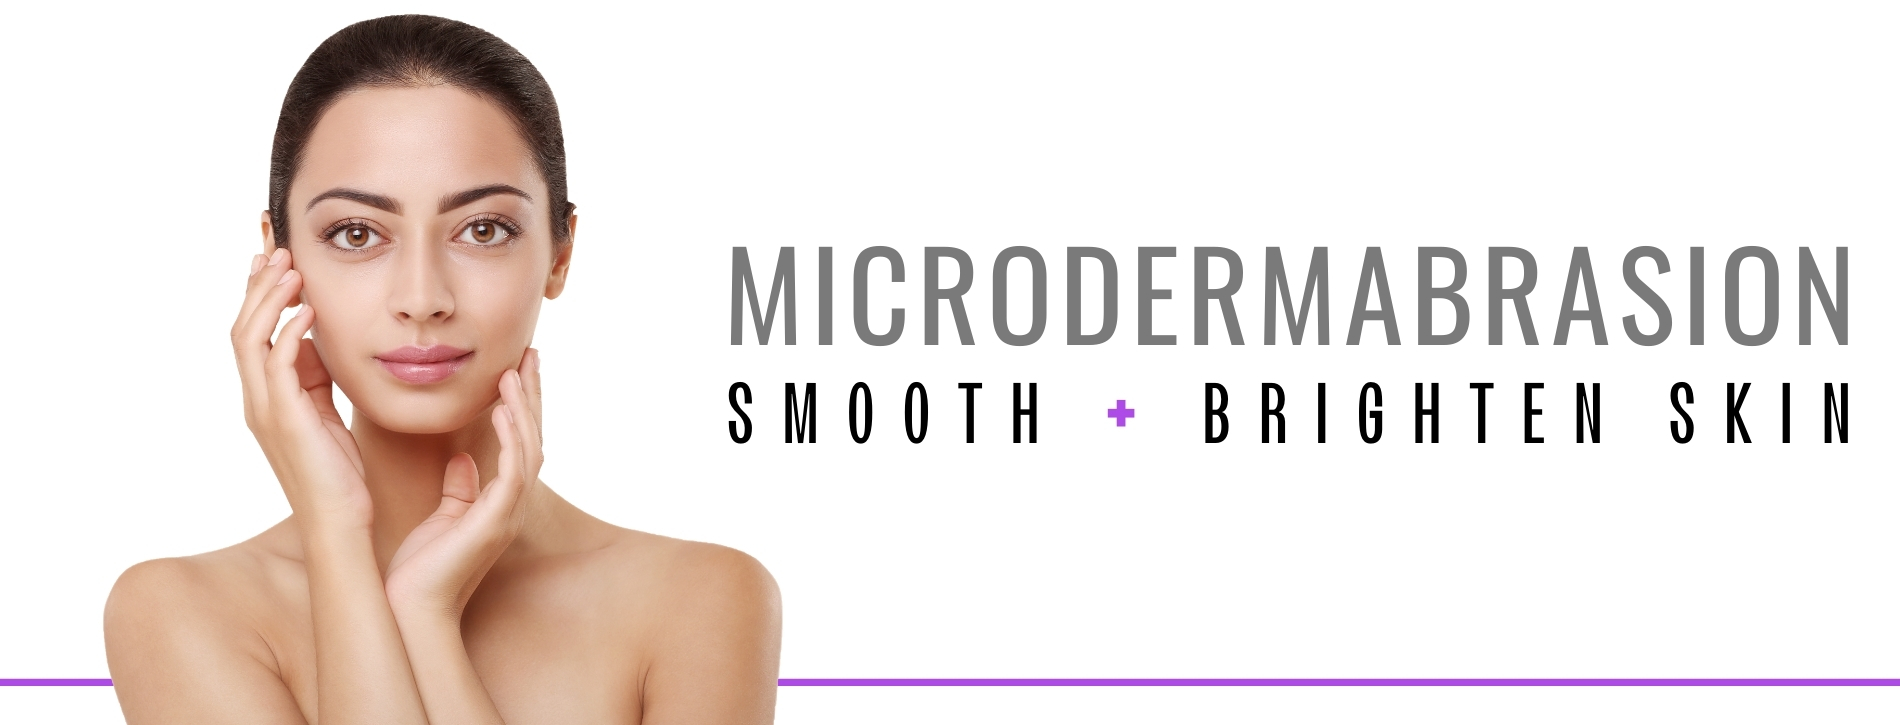 Woman touches her smooth and bright skin after Microdermabrasion treatment.